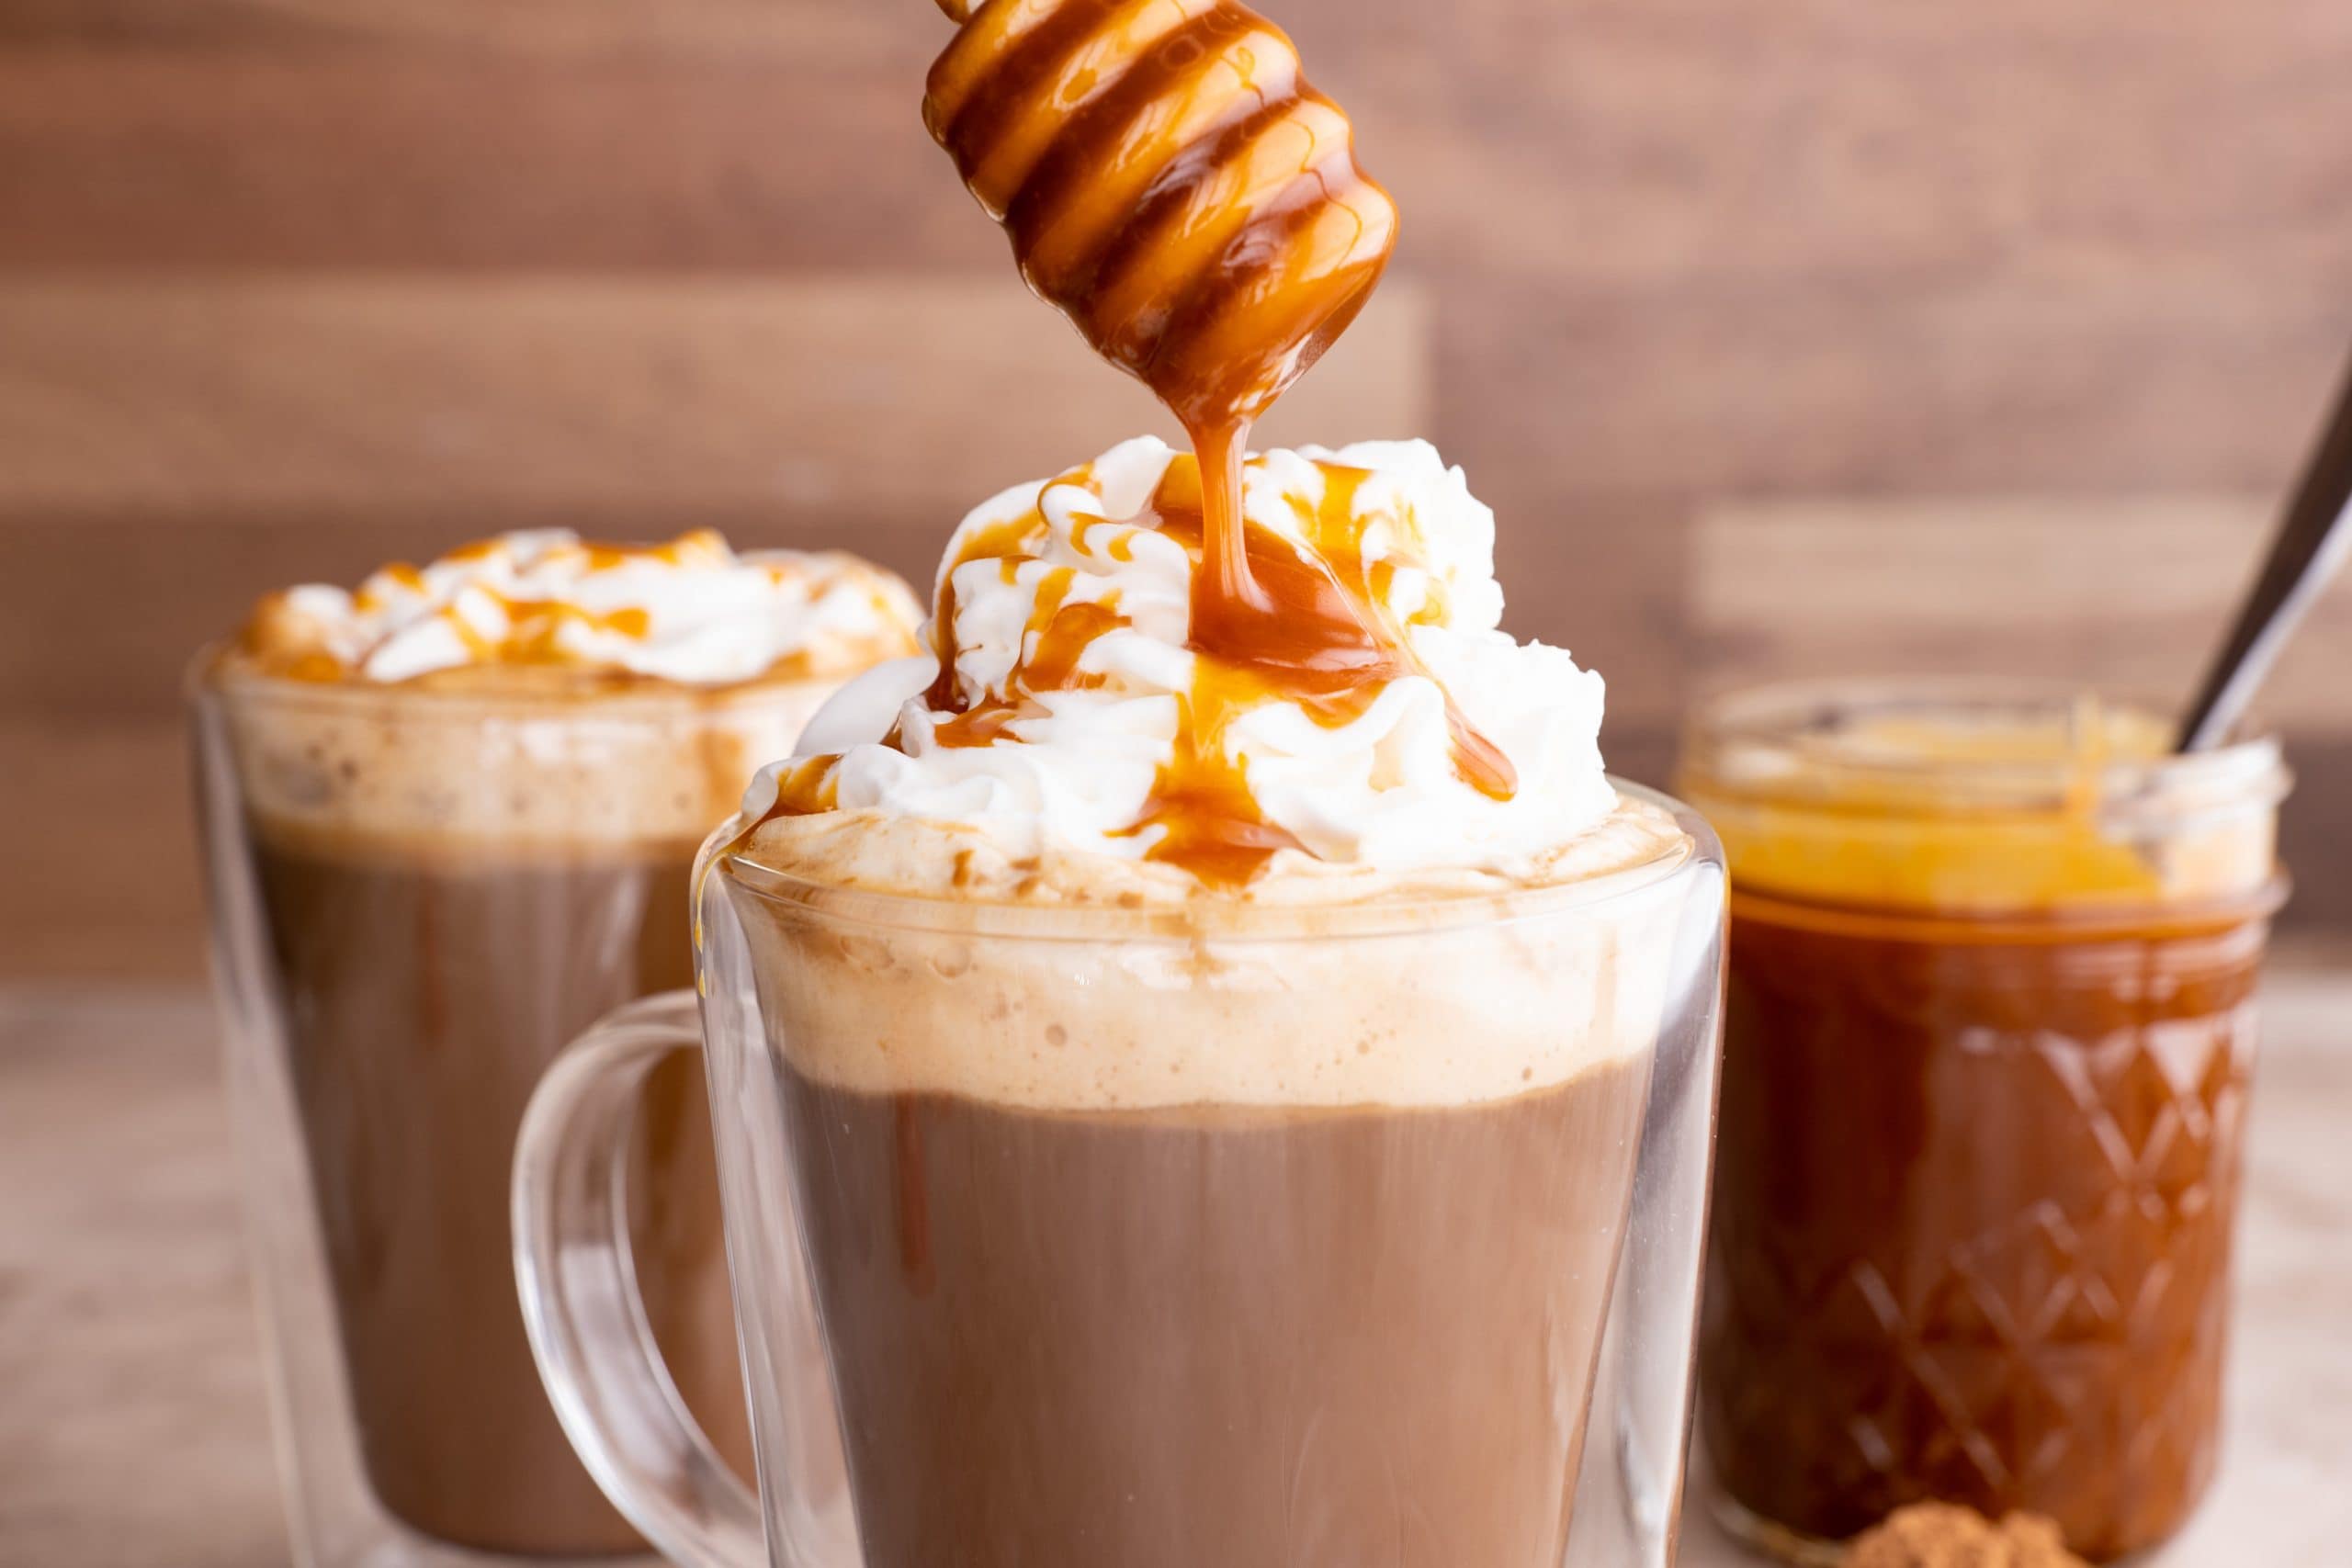 Caramel sauce is drizzled over a salted caramel mocha